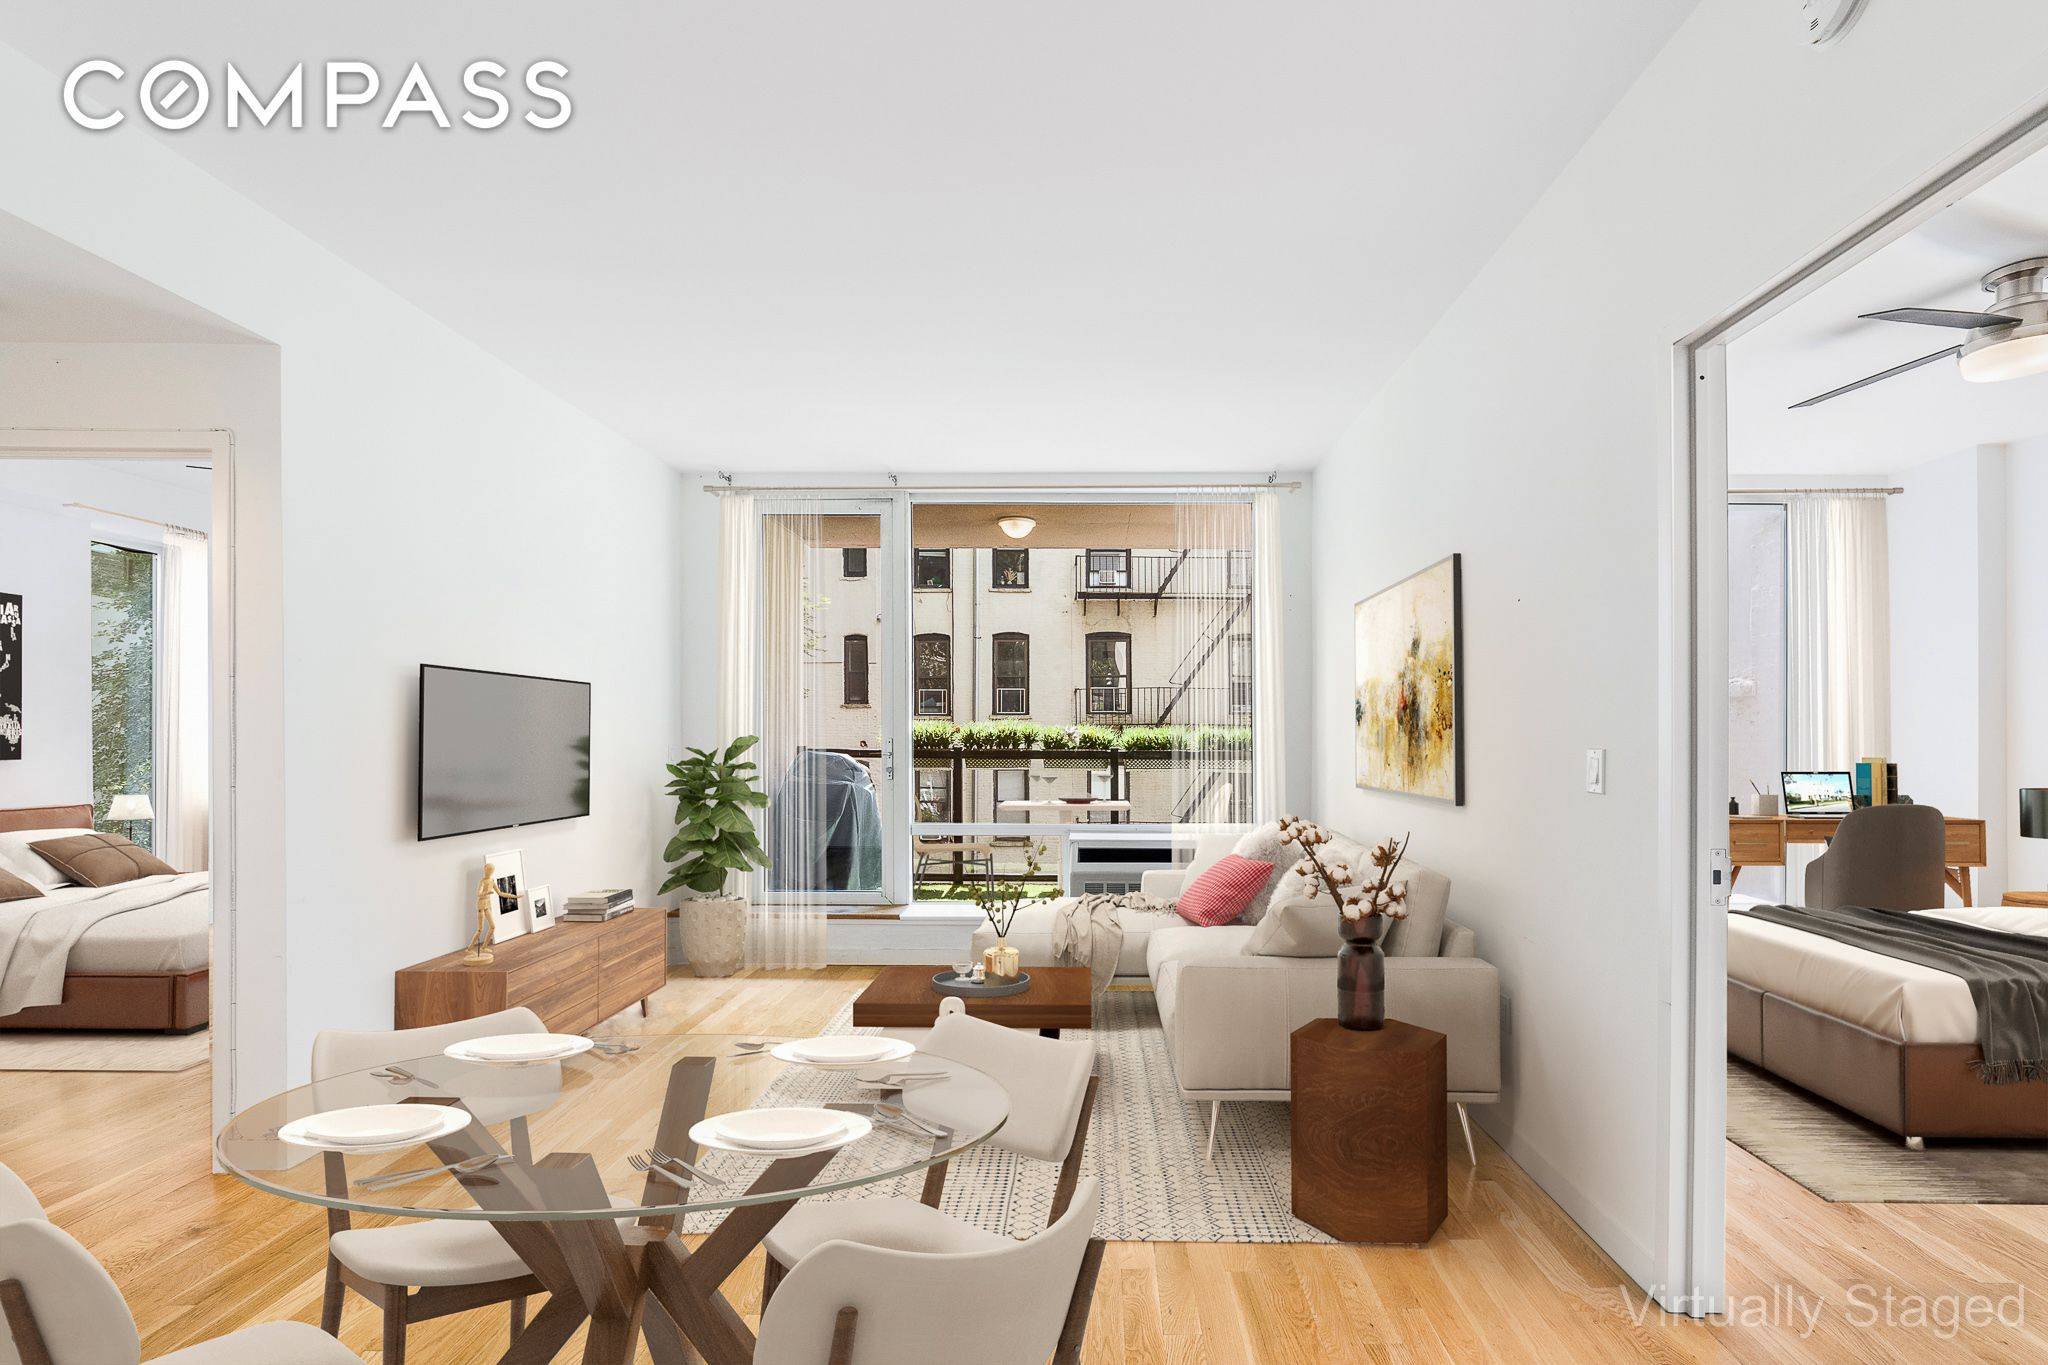 This spacious home has floor to ceiling windows, two split bedrooms a private balcony and gourmet kitchen and is waiting for you to call it home.